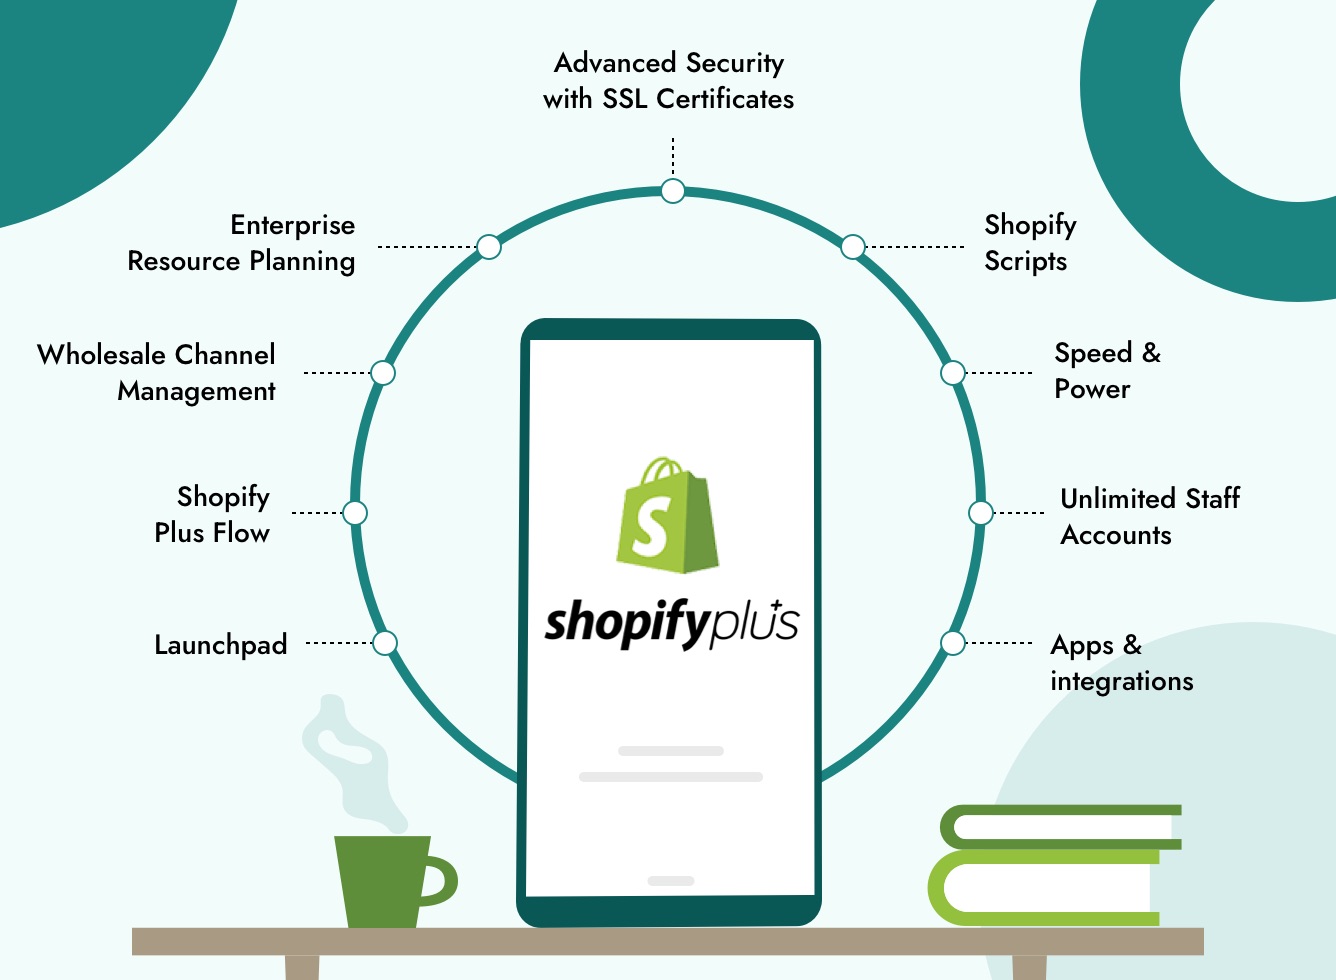 How to View Staff Account Login History on Shopify